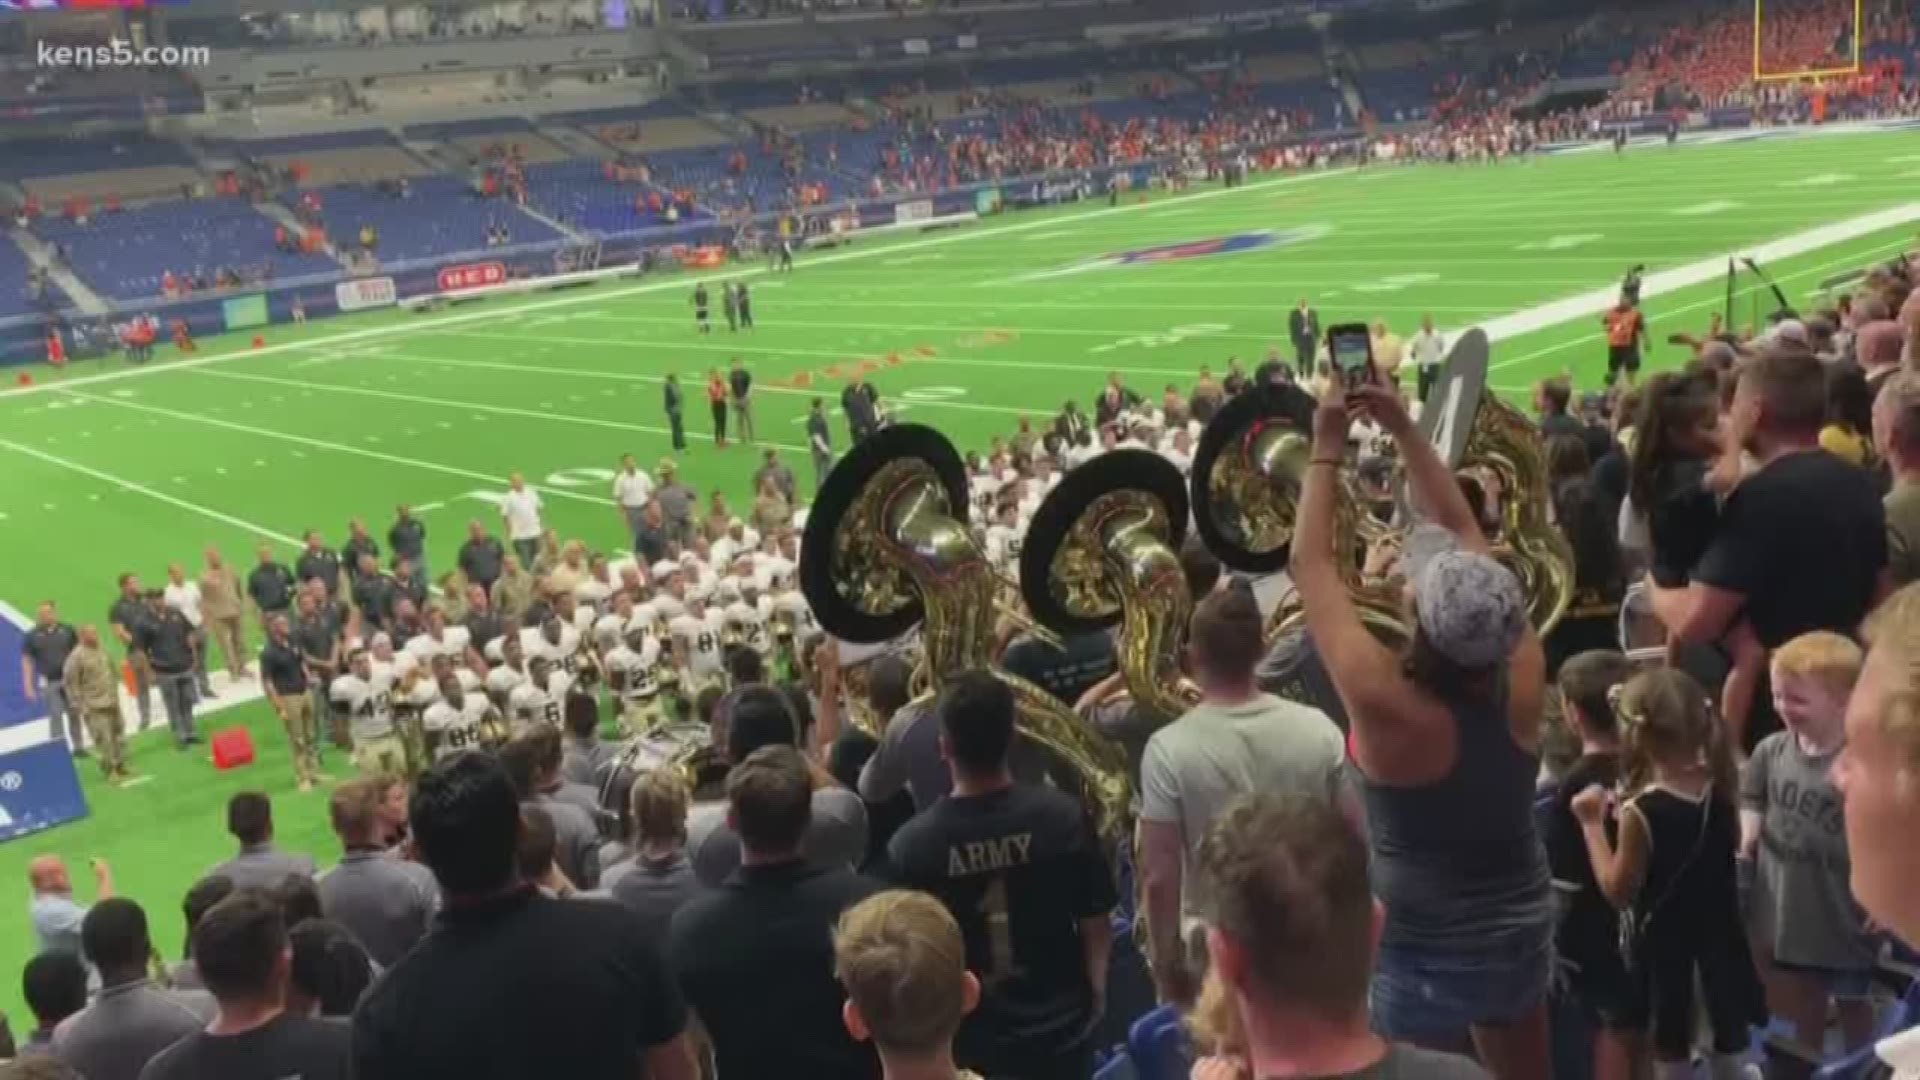 After the game, UTSA played its school song. Then, when the Army band started playing its West Point alma mater, UTSA’s band broke in with another song.